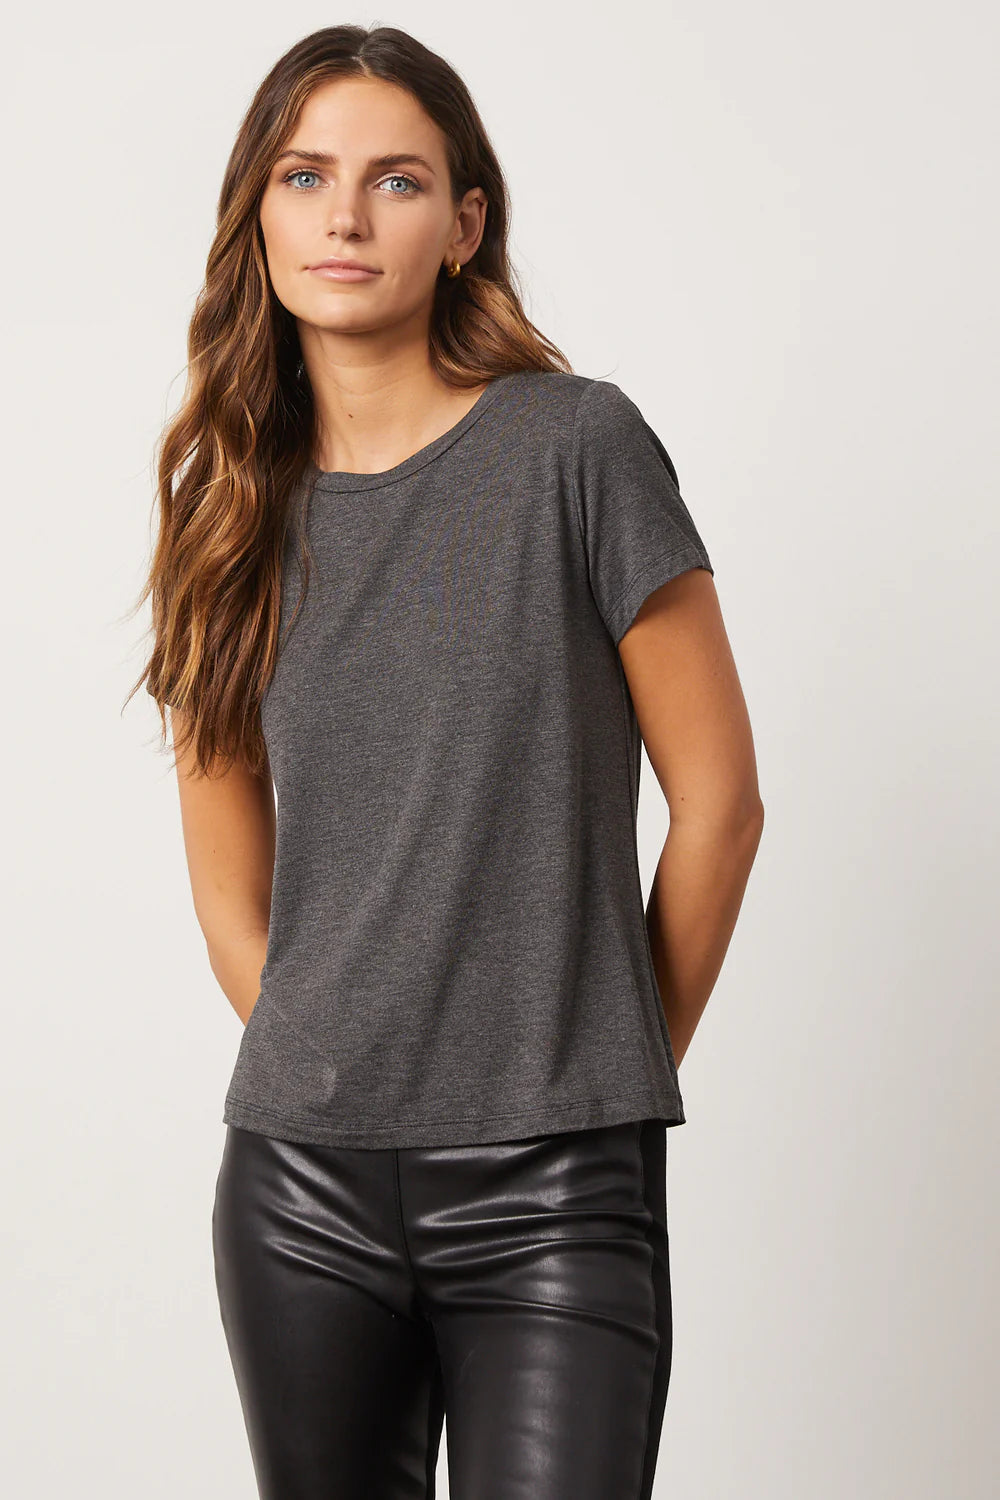 Evelyn Top Anthracite - Bailey 44